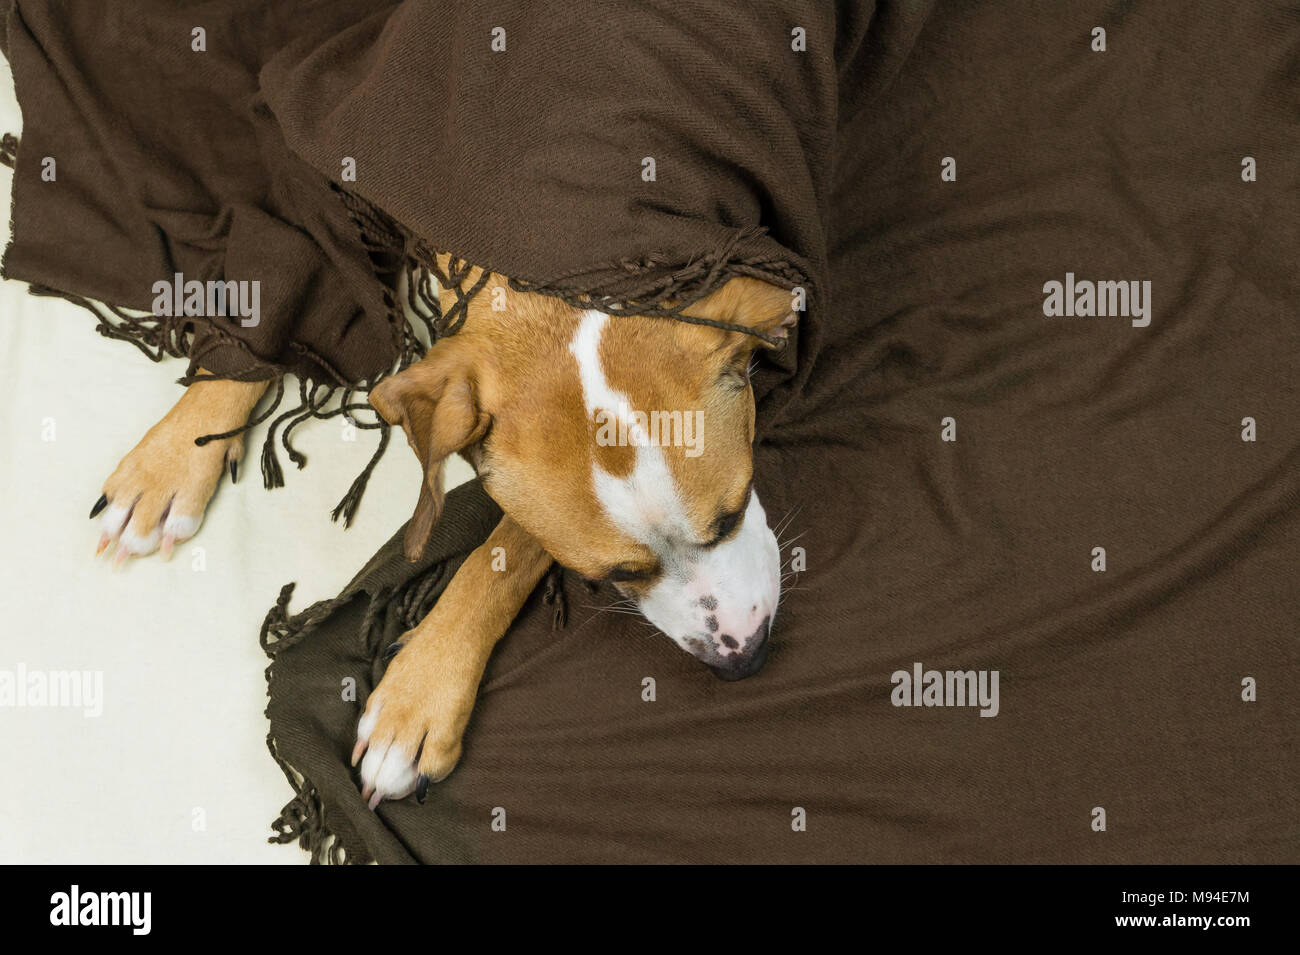 Lazy or sick pet dog relaxing and sleeping in clean white throw blanket. Sleepy staffordshire terrier dog covered in plaid resting indoors in tidy min Stock Photo